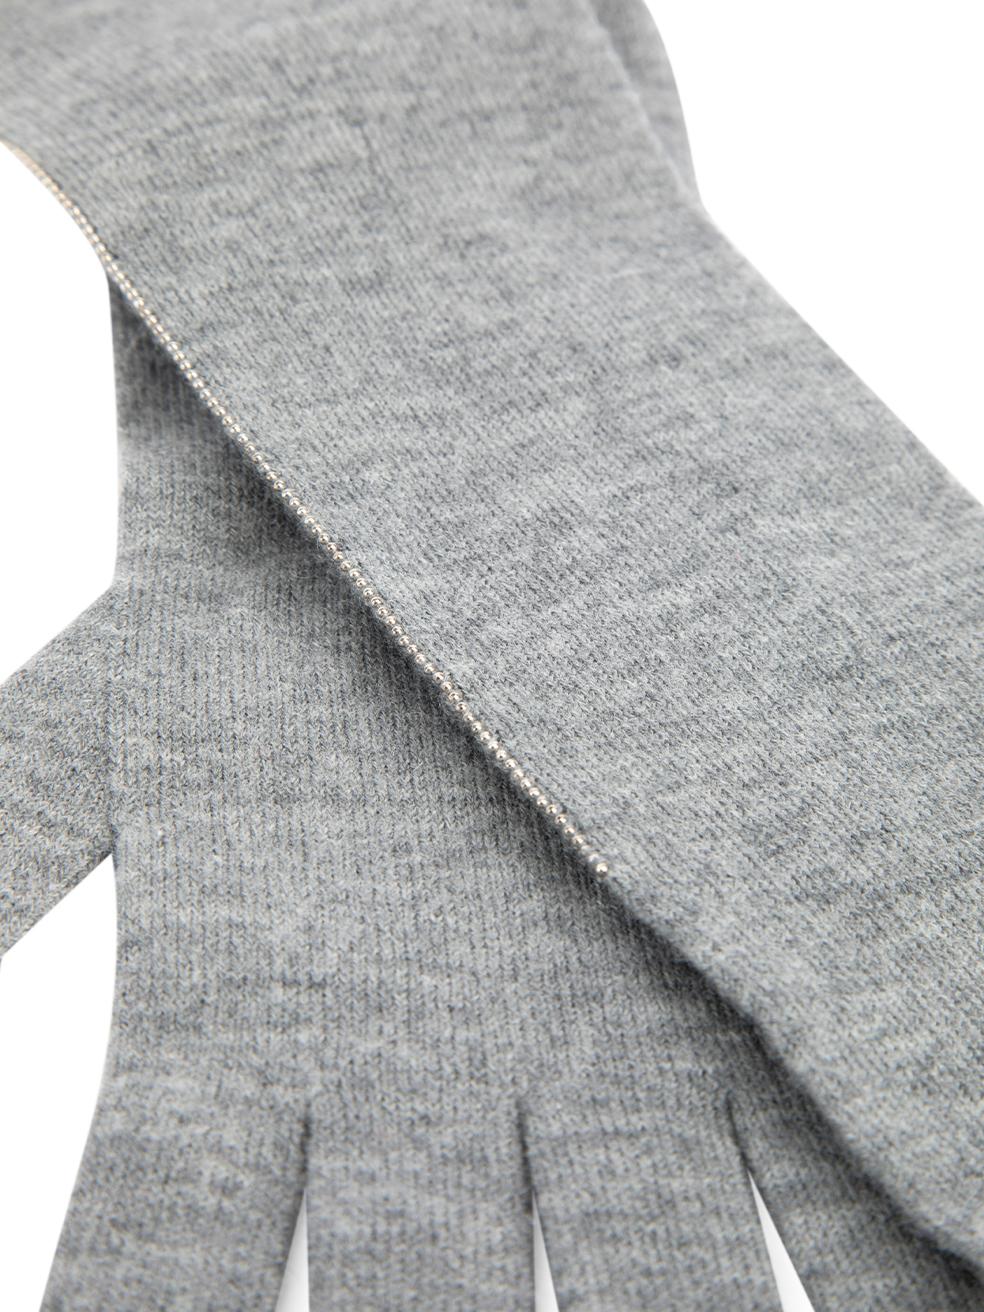 CONDITION is Never Worn. No visible wear to gloves is evident on this used Brunello Cucinelli designer resale item. This item includes the original dustbag. Details Grey Cashmere Gloves Above elbow length Glitter embellished Made in Italy